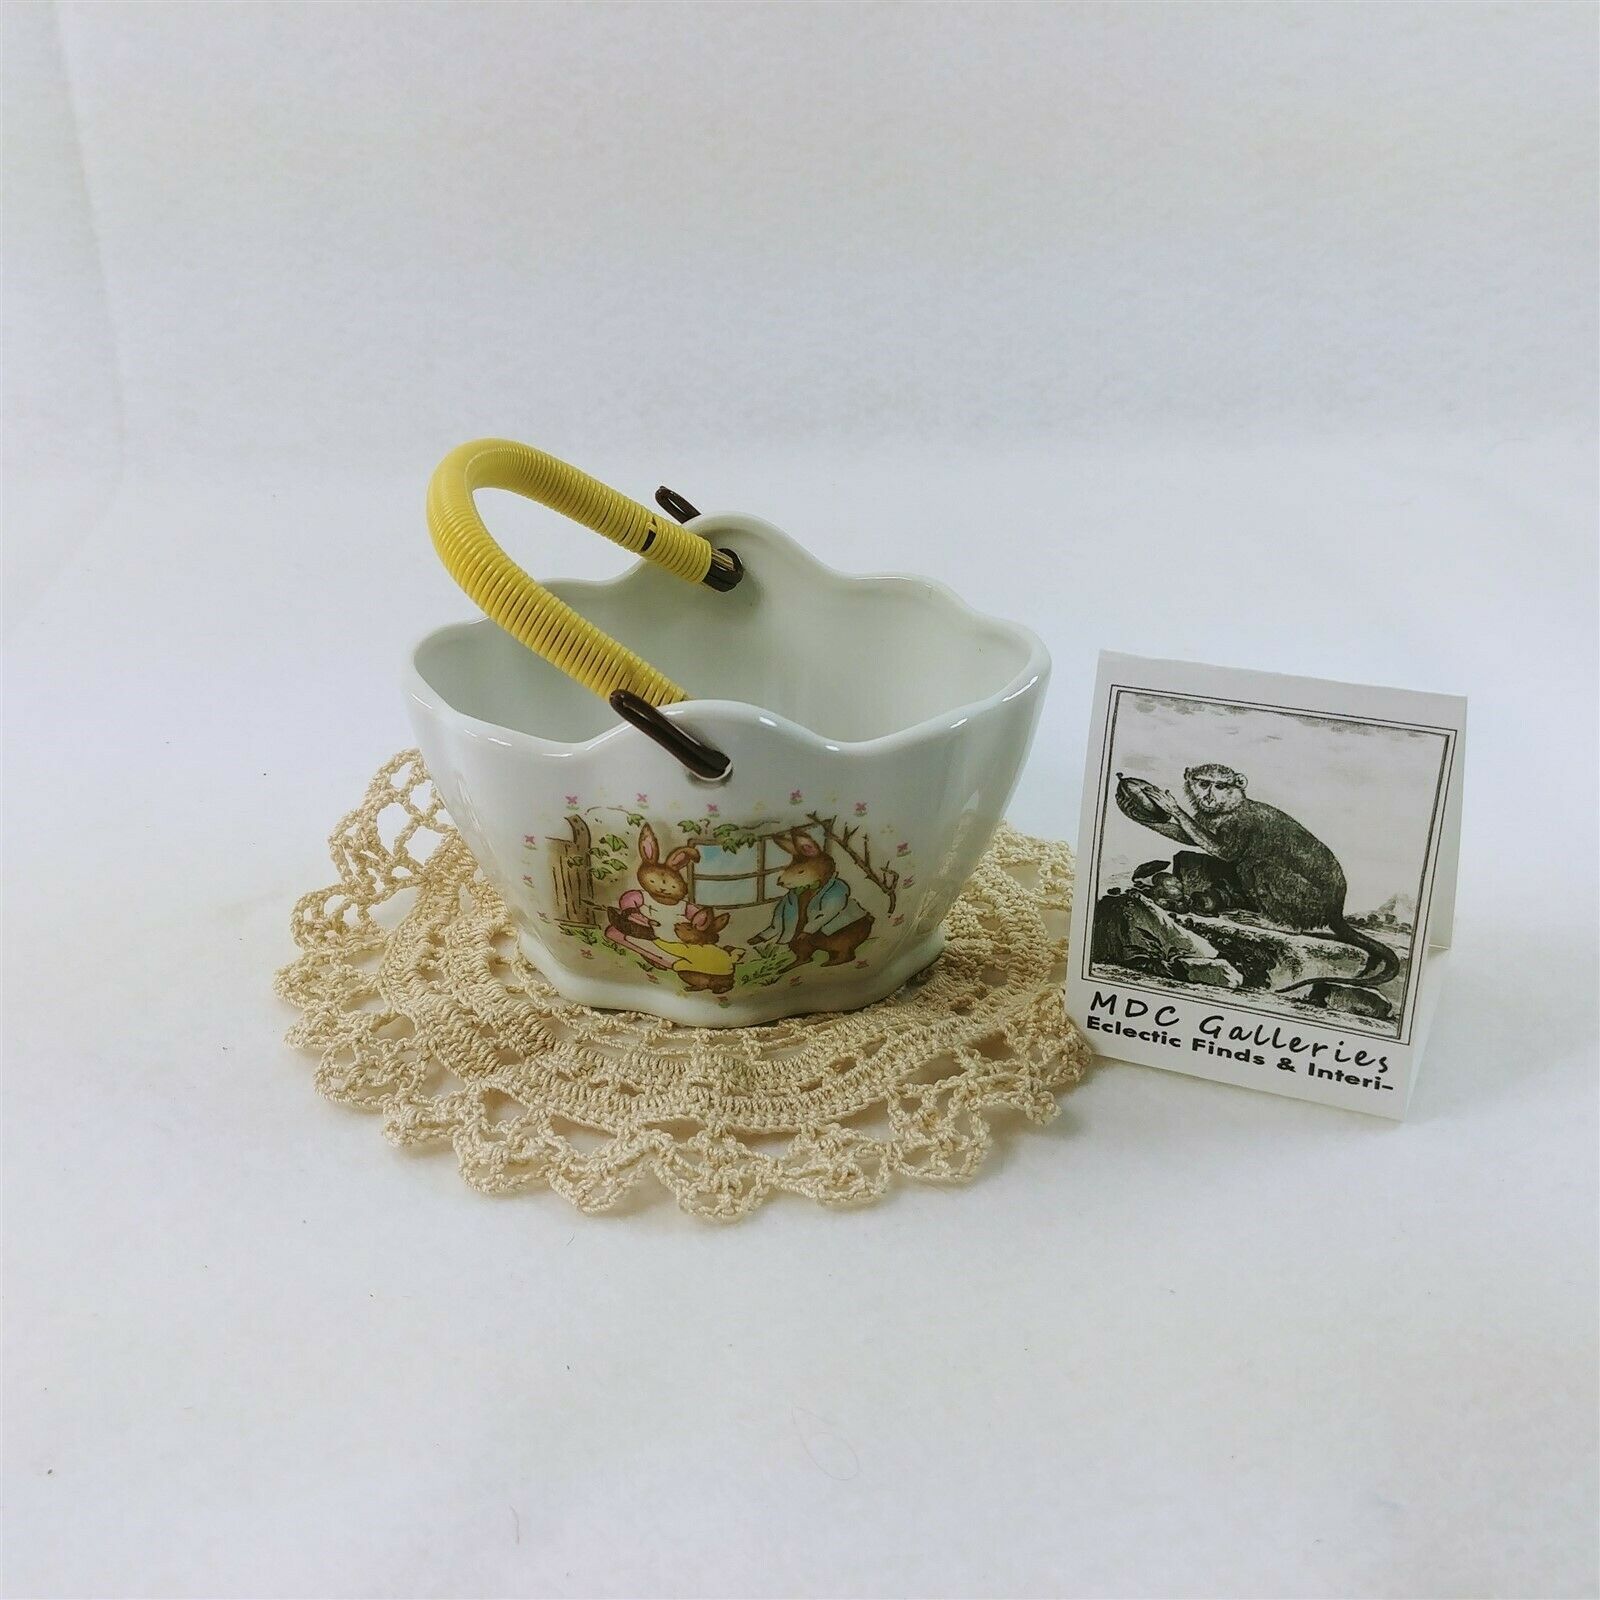 Primary image for Candy Dish Basket Ceramic with Handle Bunny Motif Wicks N Sticks Japan